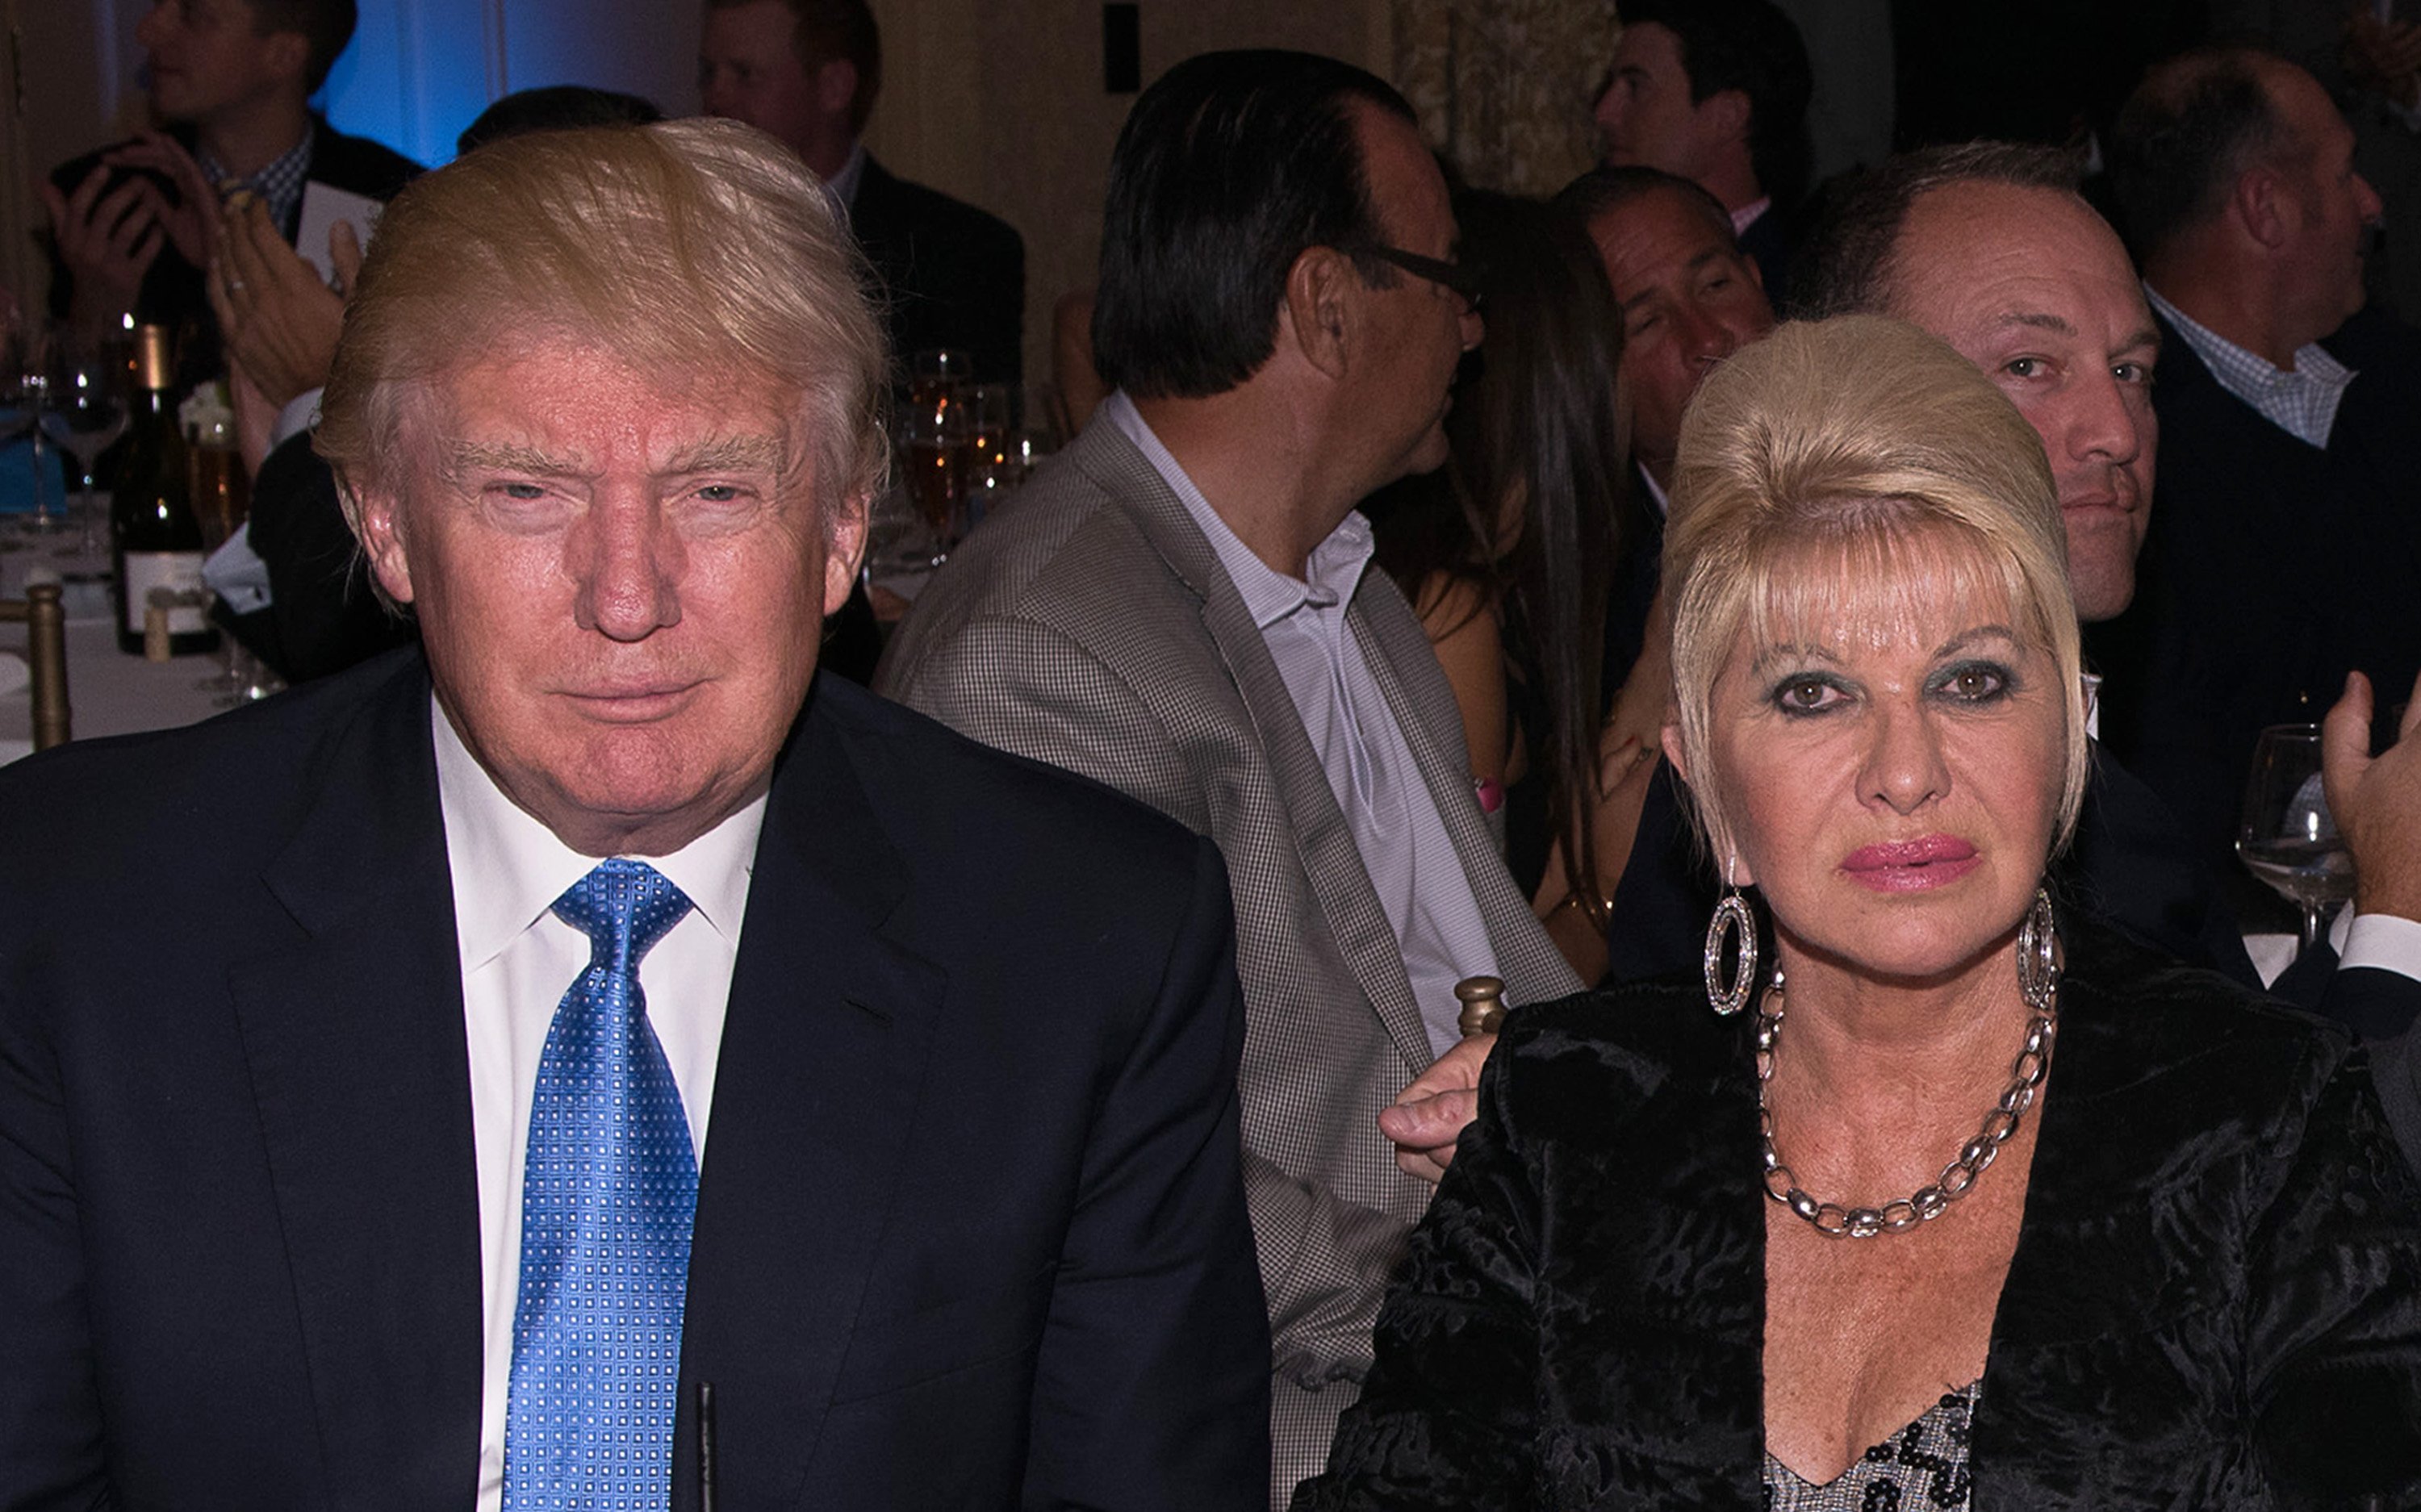 Donald Trump, Ivana Trump on September 15, 2014 in Briarcliff Manor, New York | Photo: Getty Images